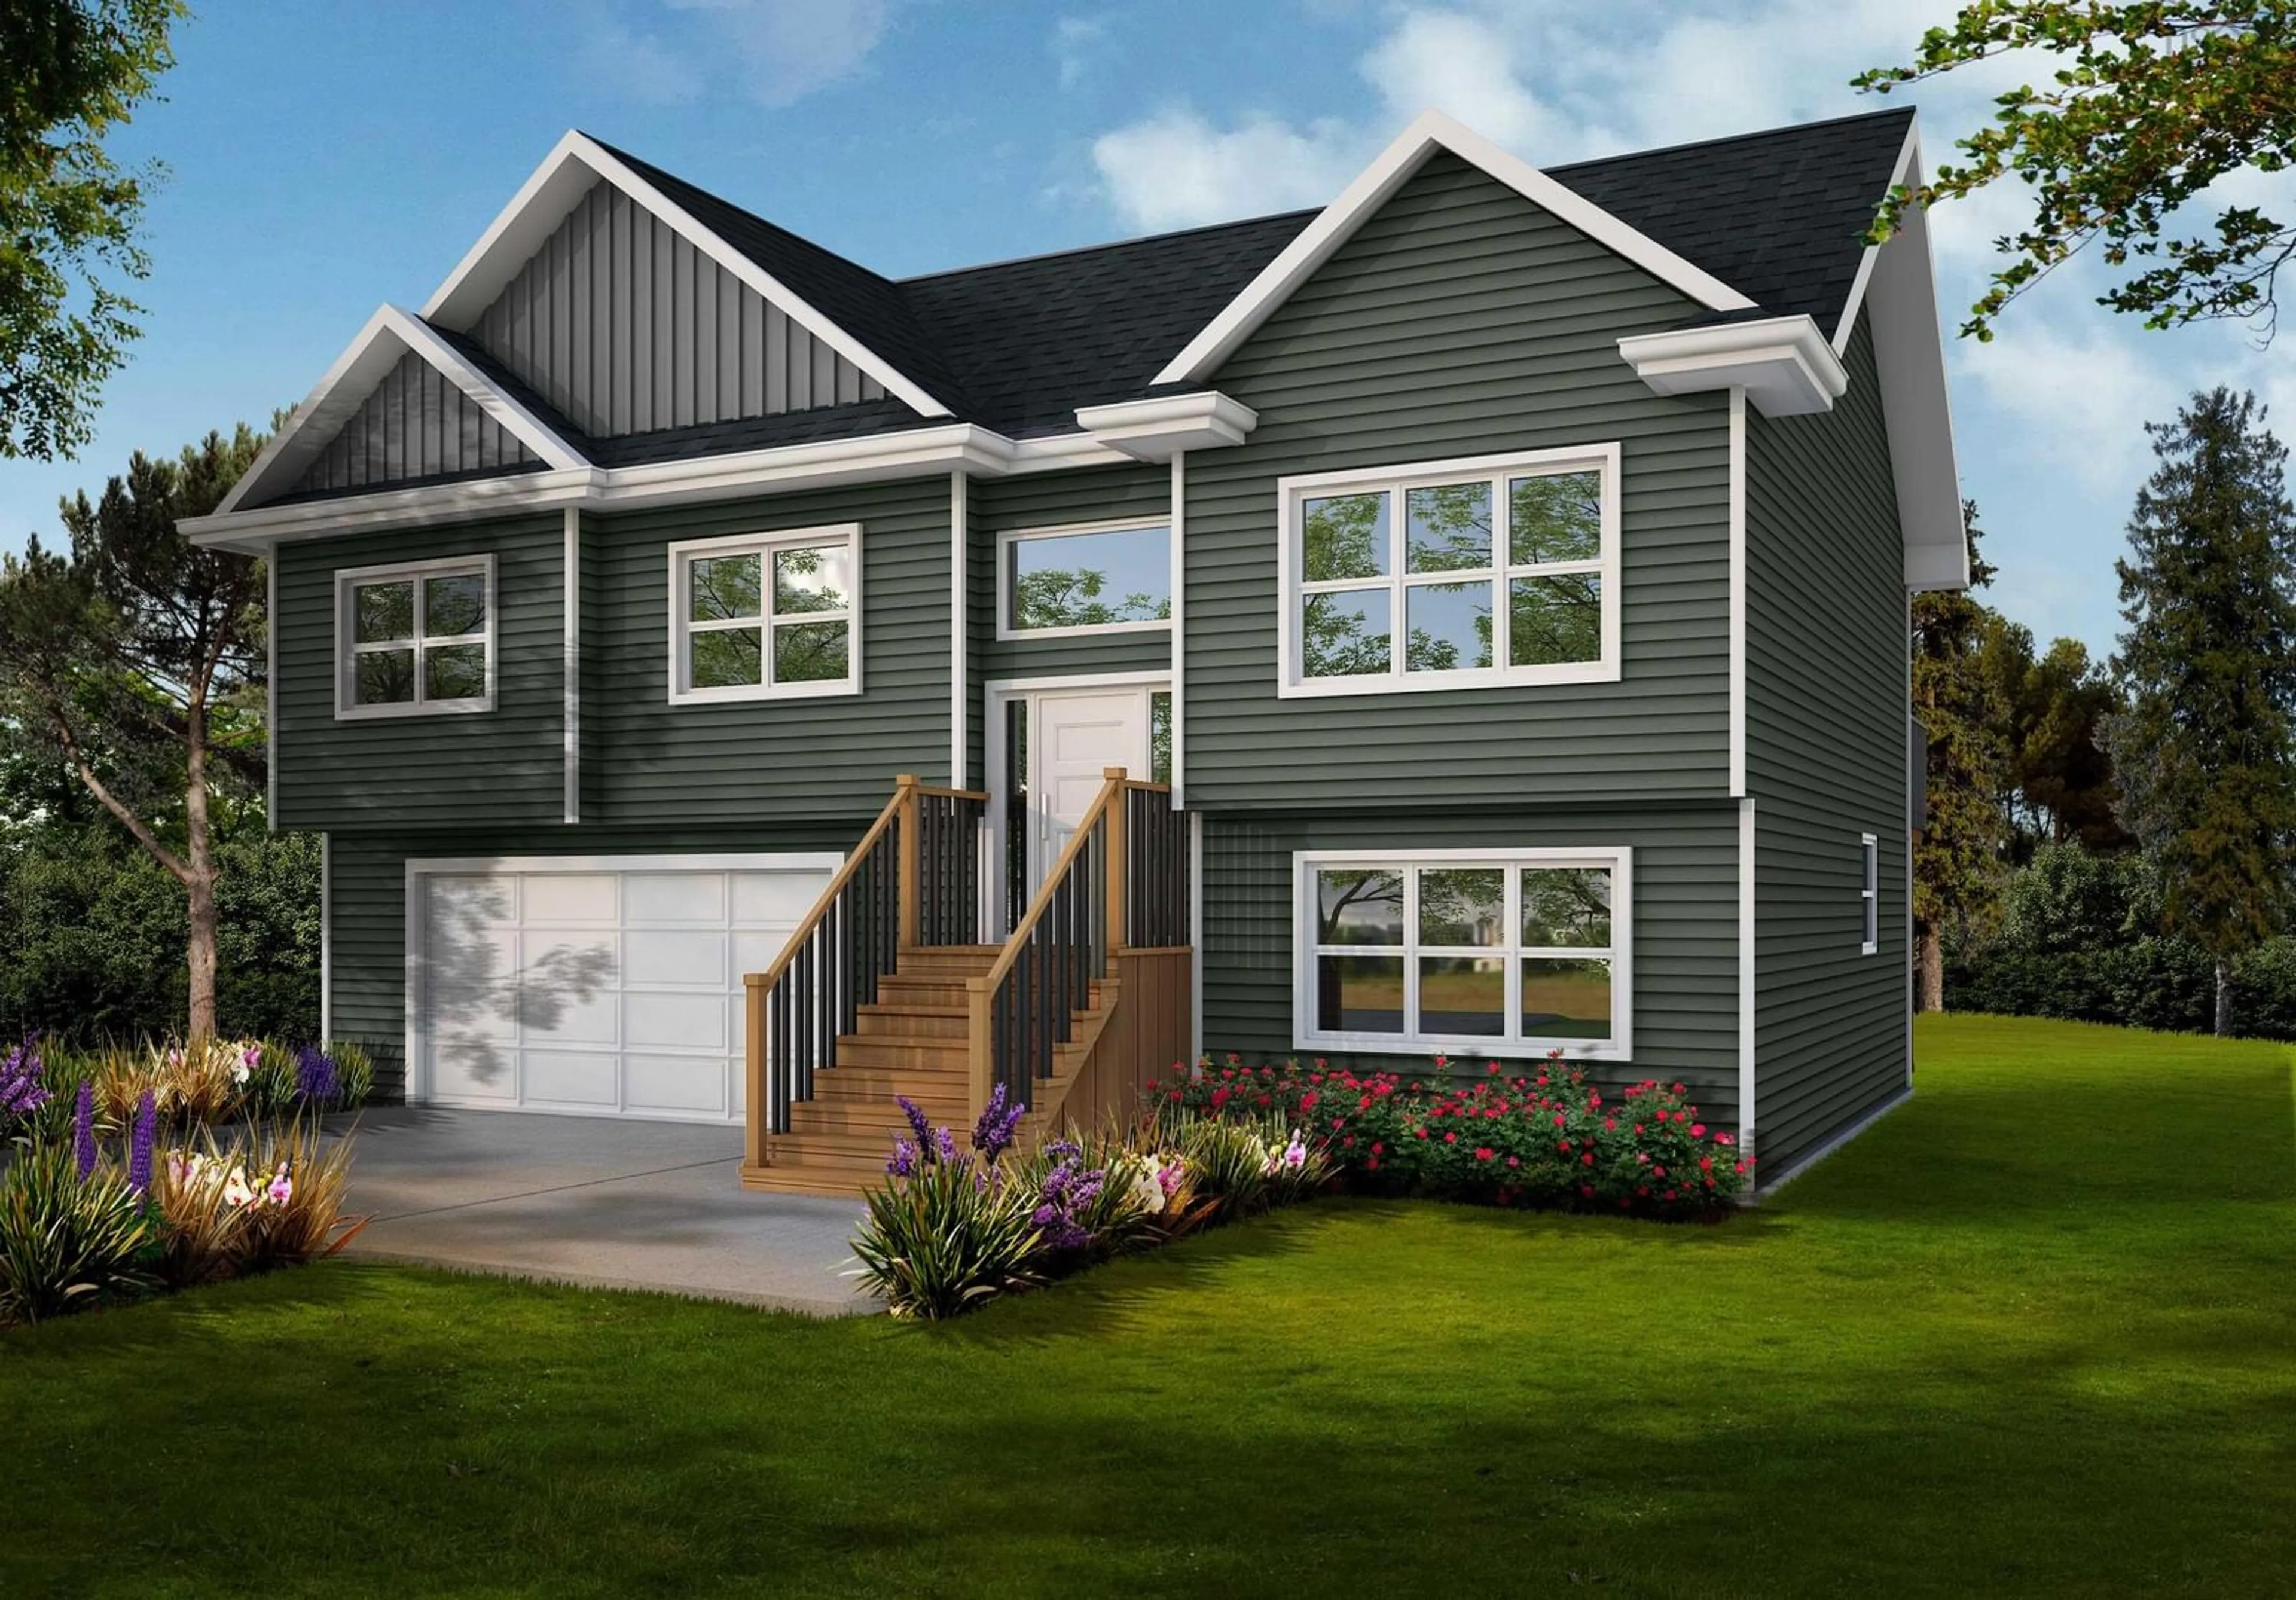 Home with vinyl exterior material for 34 Christies Rd #Lot 21-C, Boutiliers Point Nova Scotia B3Z 1S1